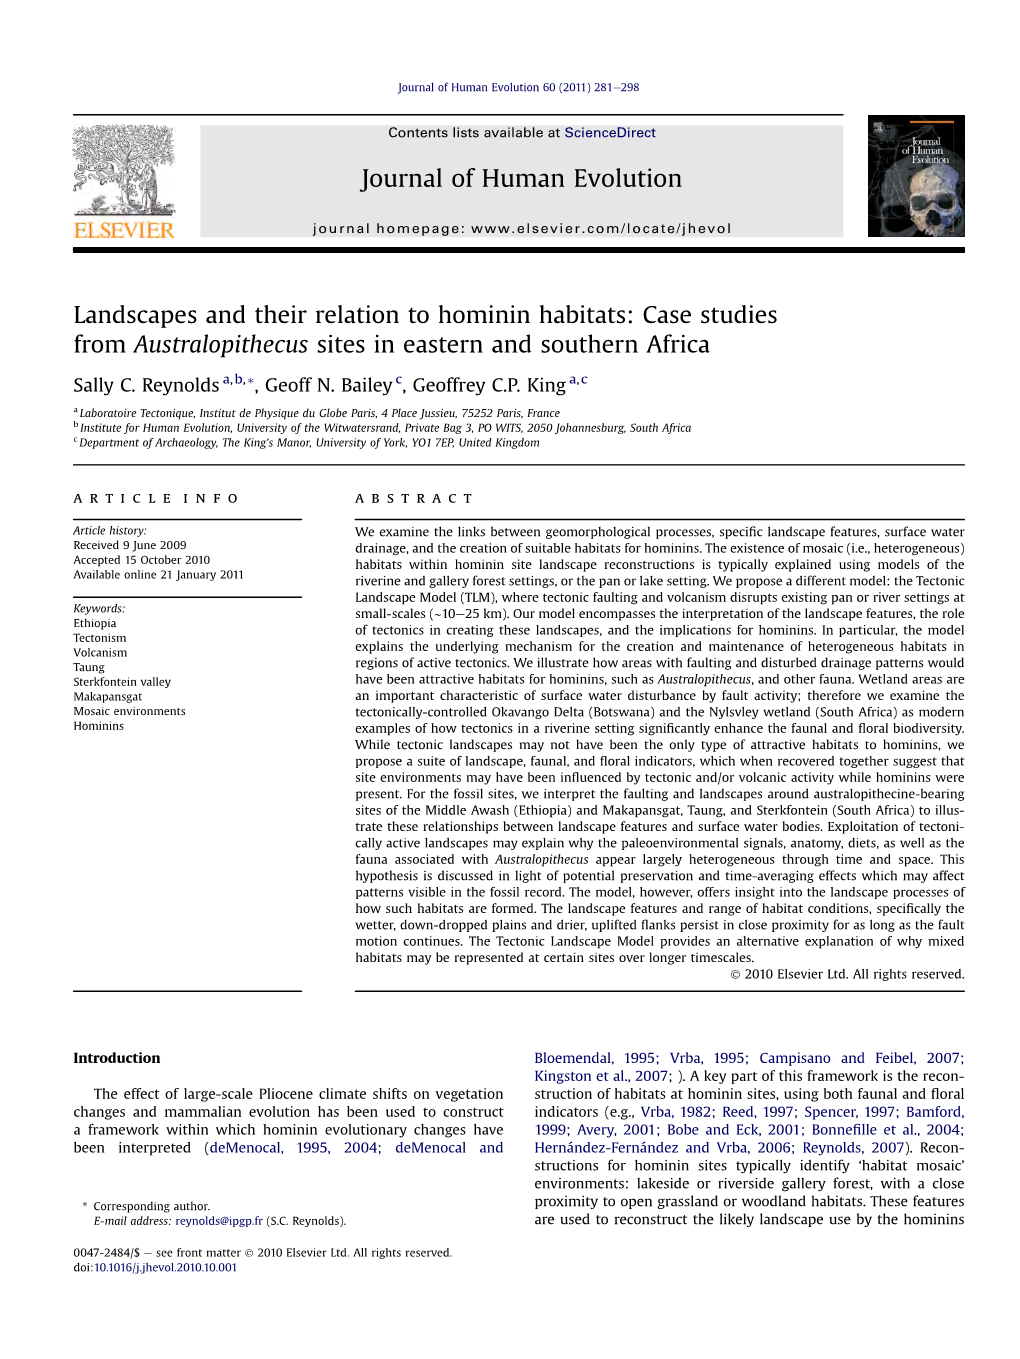 Landscapes and Their Relation to Hominin Habitats: Case Studies from Australopithecus Sites in Eastern and Southern Africa